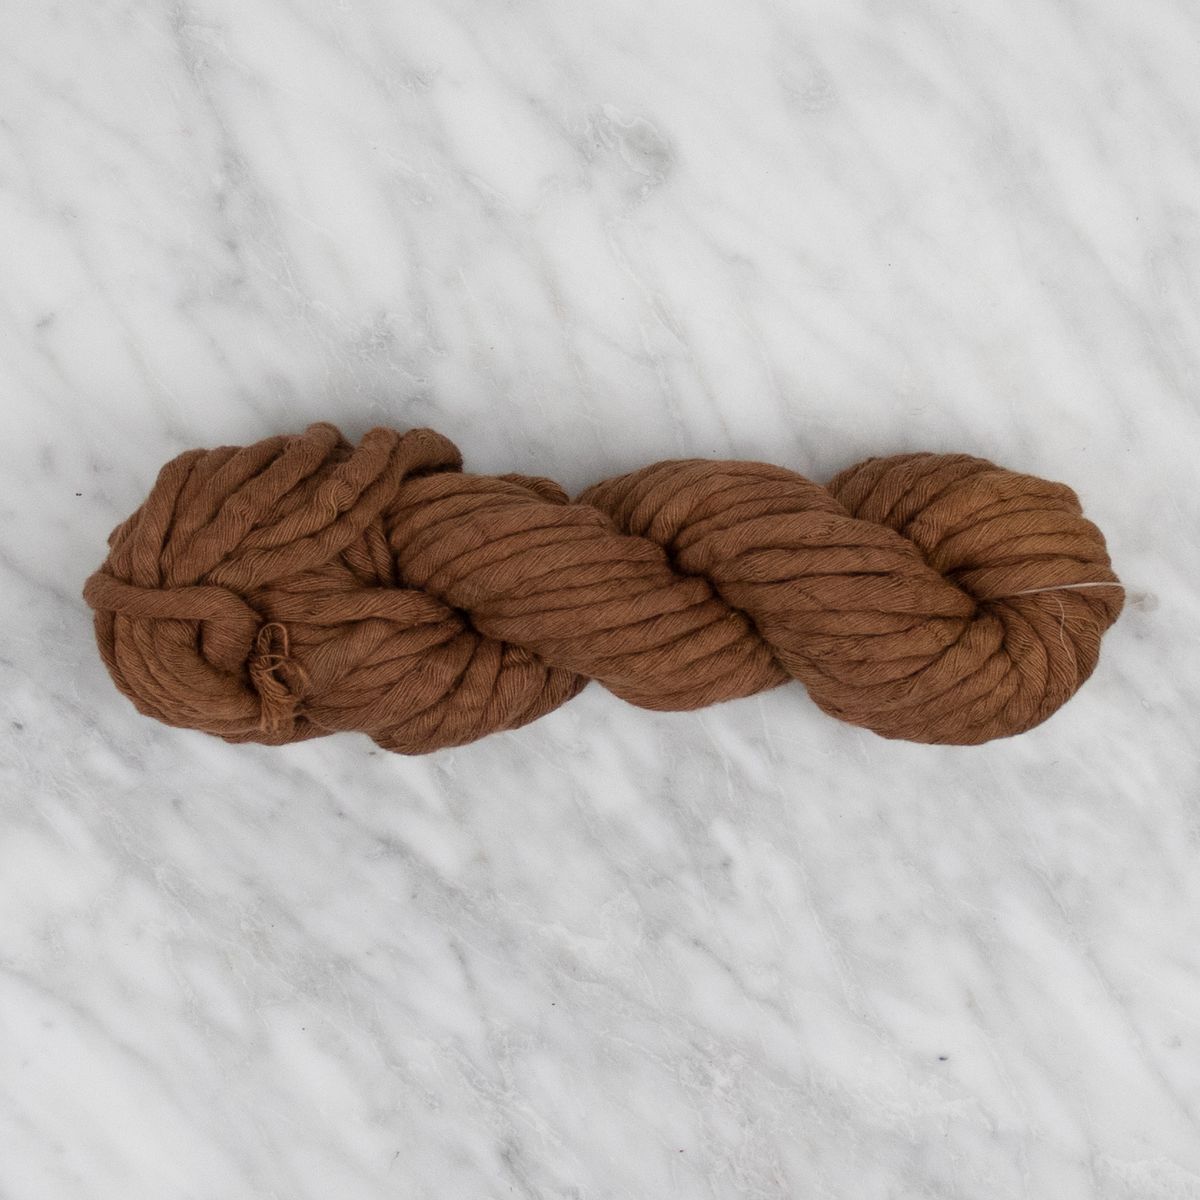 5mm Hand-Dyed Cotton String - Bronze- 100 grams